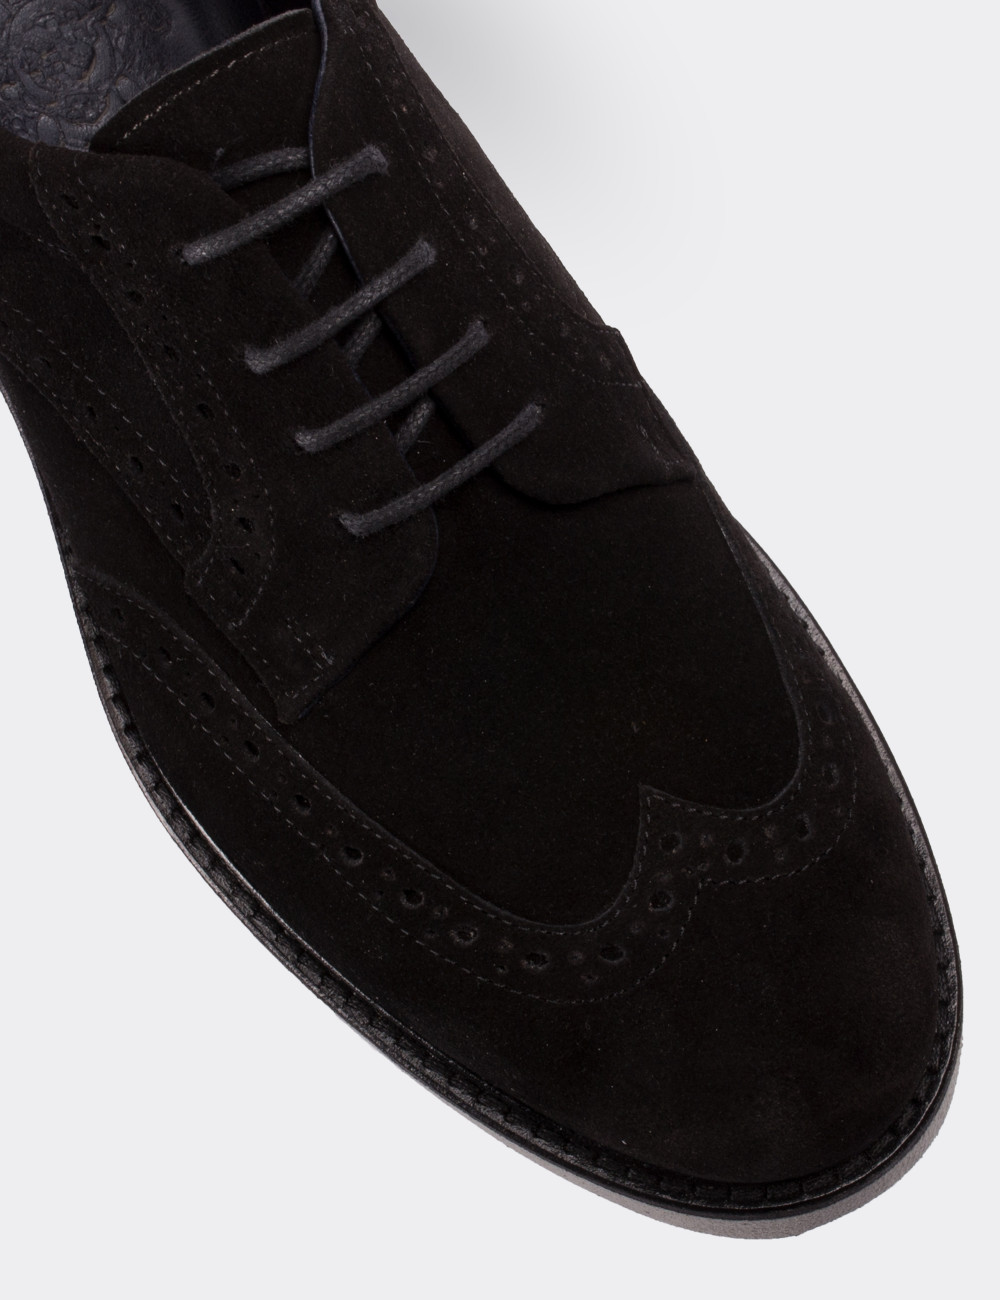 Black Suede Leather Lace-up Shoes - 01691MSYHE01